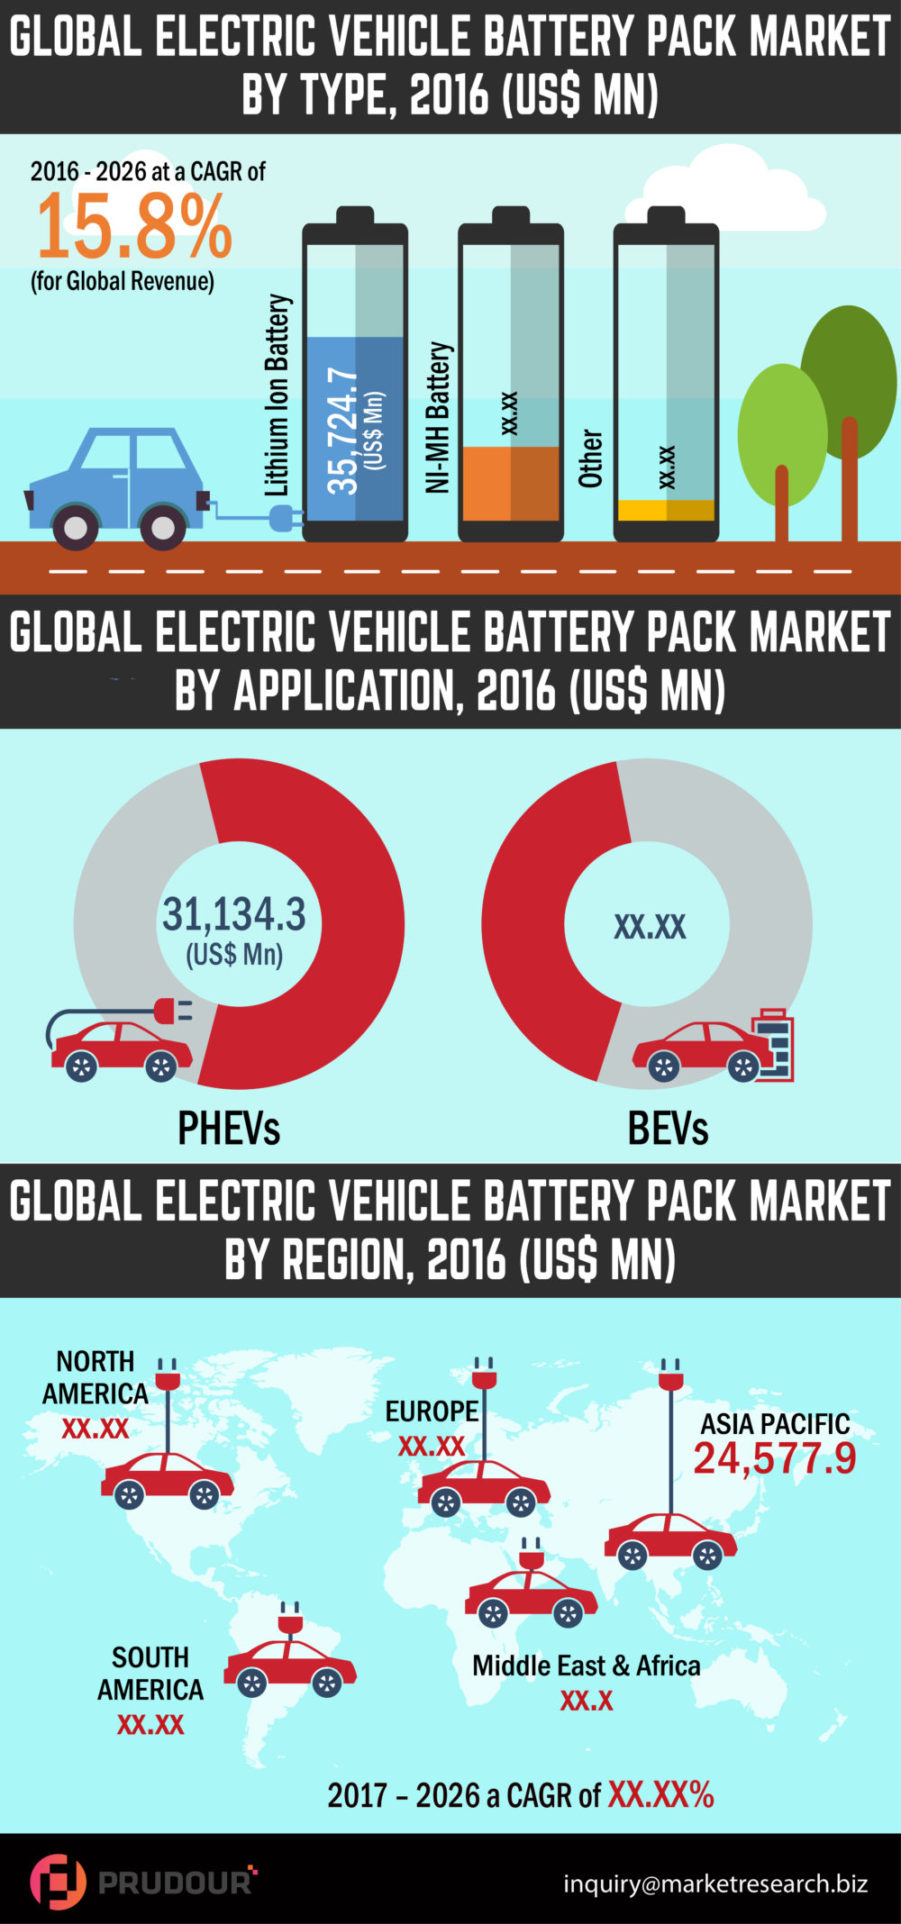 Worldwide Electric Vehicle Battery Pack Market about to hit CAGR of 15.8% from 2017 to 2026